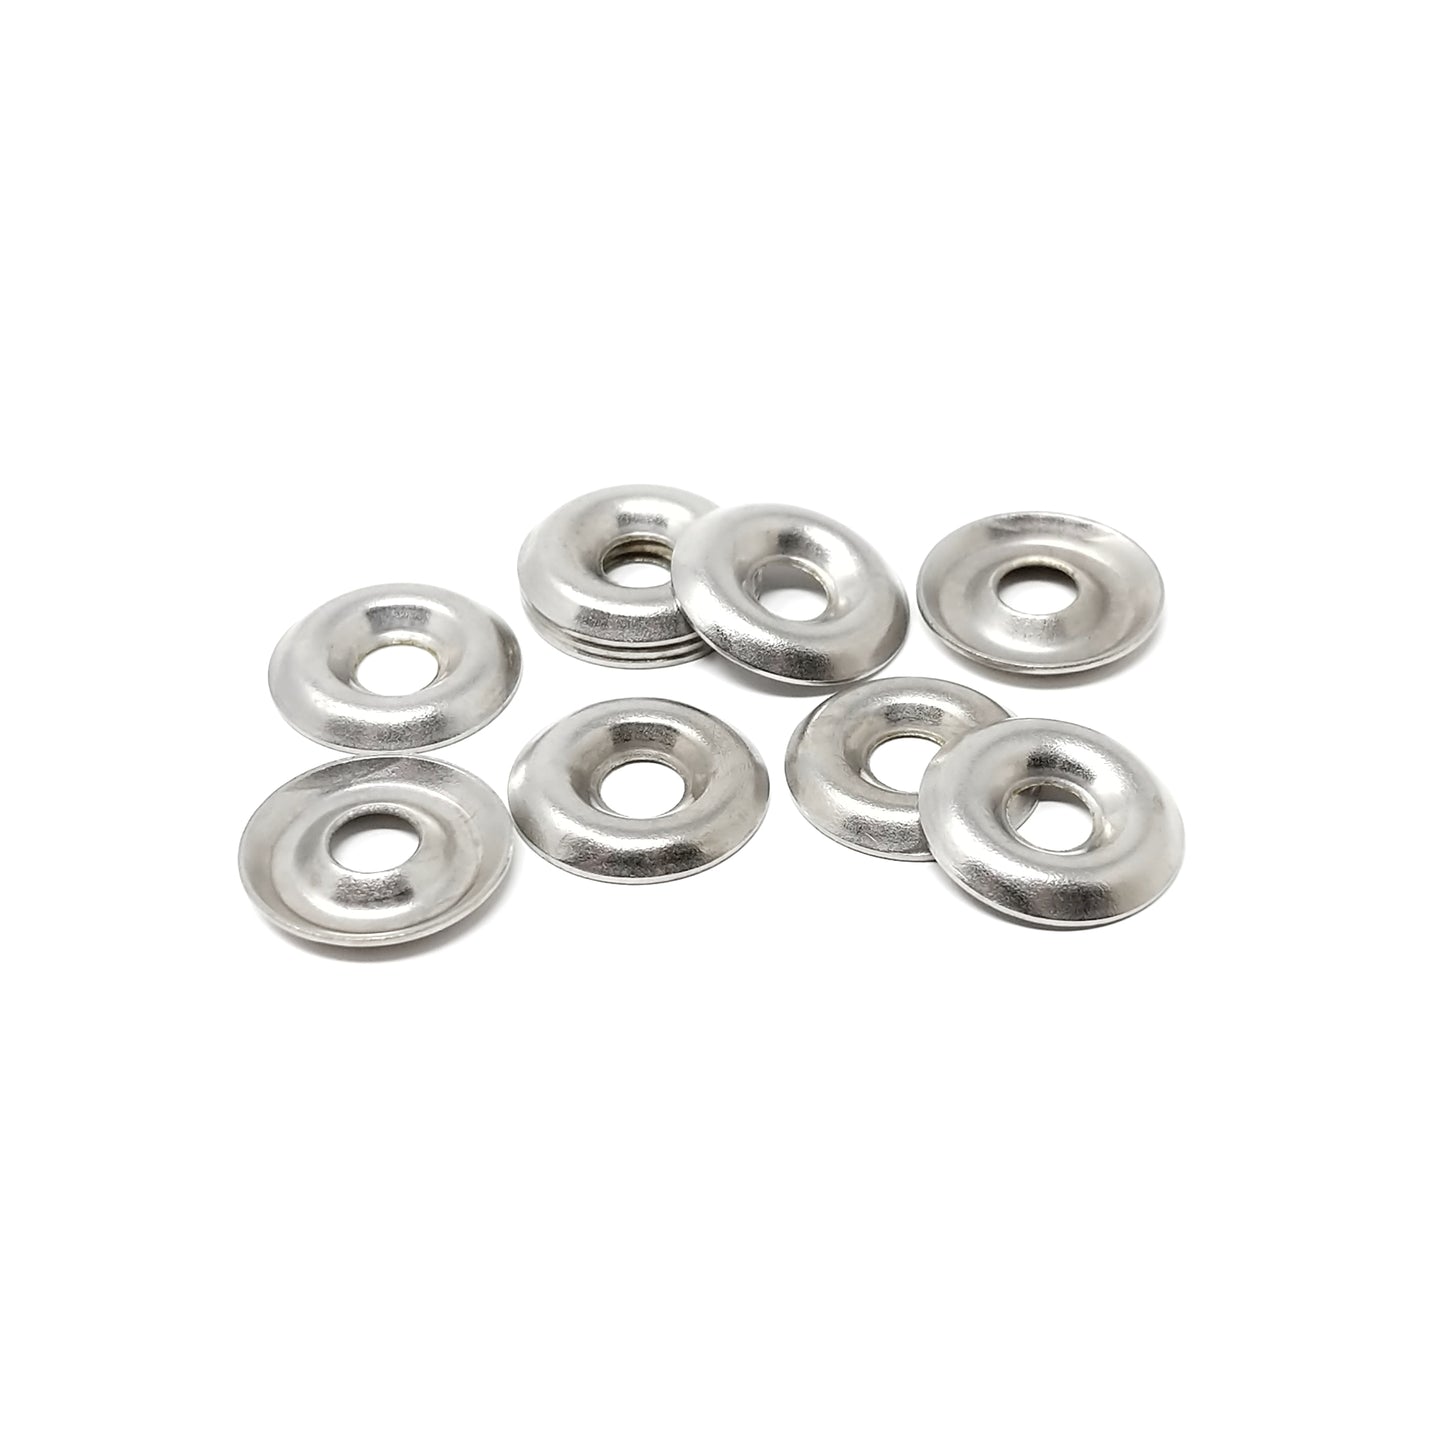 4.1mm Rosette Washers For Screws - Nickel Plated Steel, Made In Germany - Keay Vital Parts